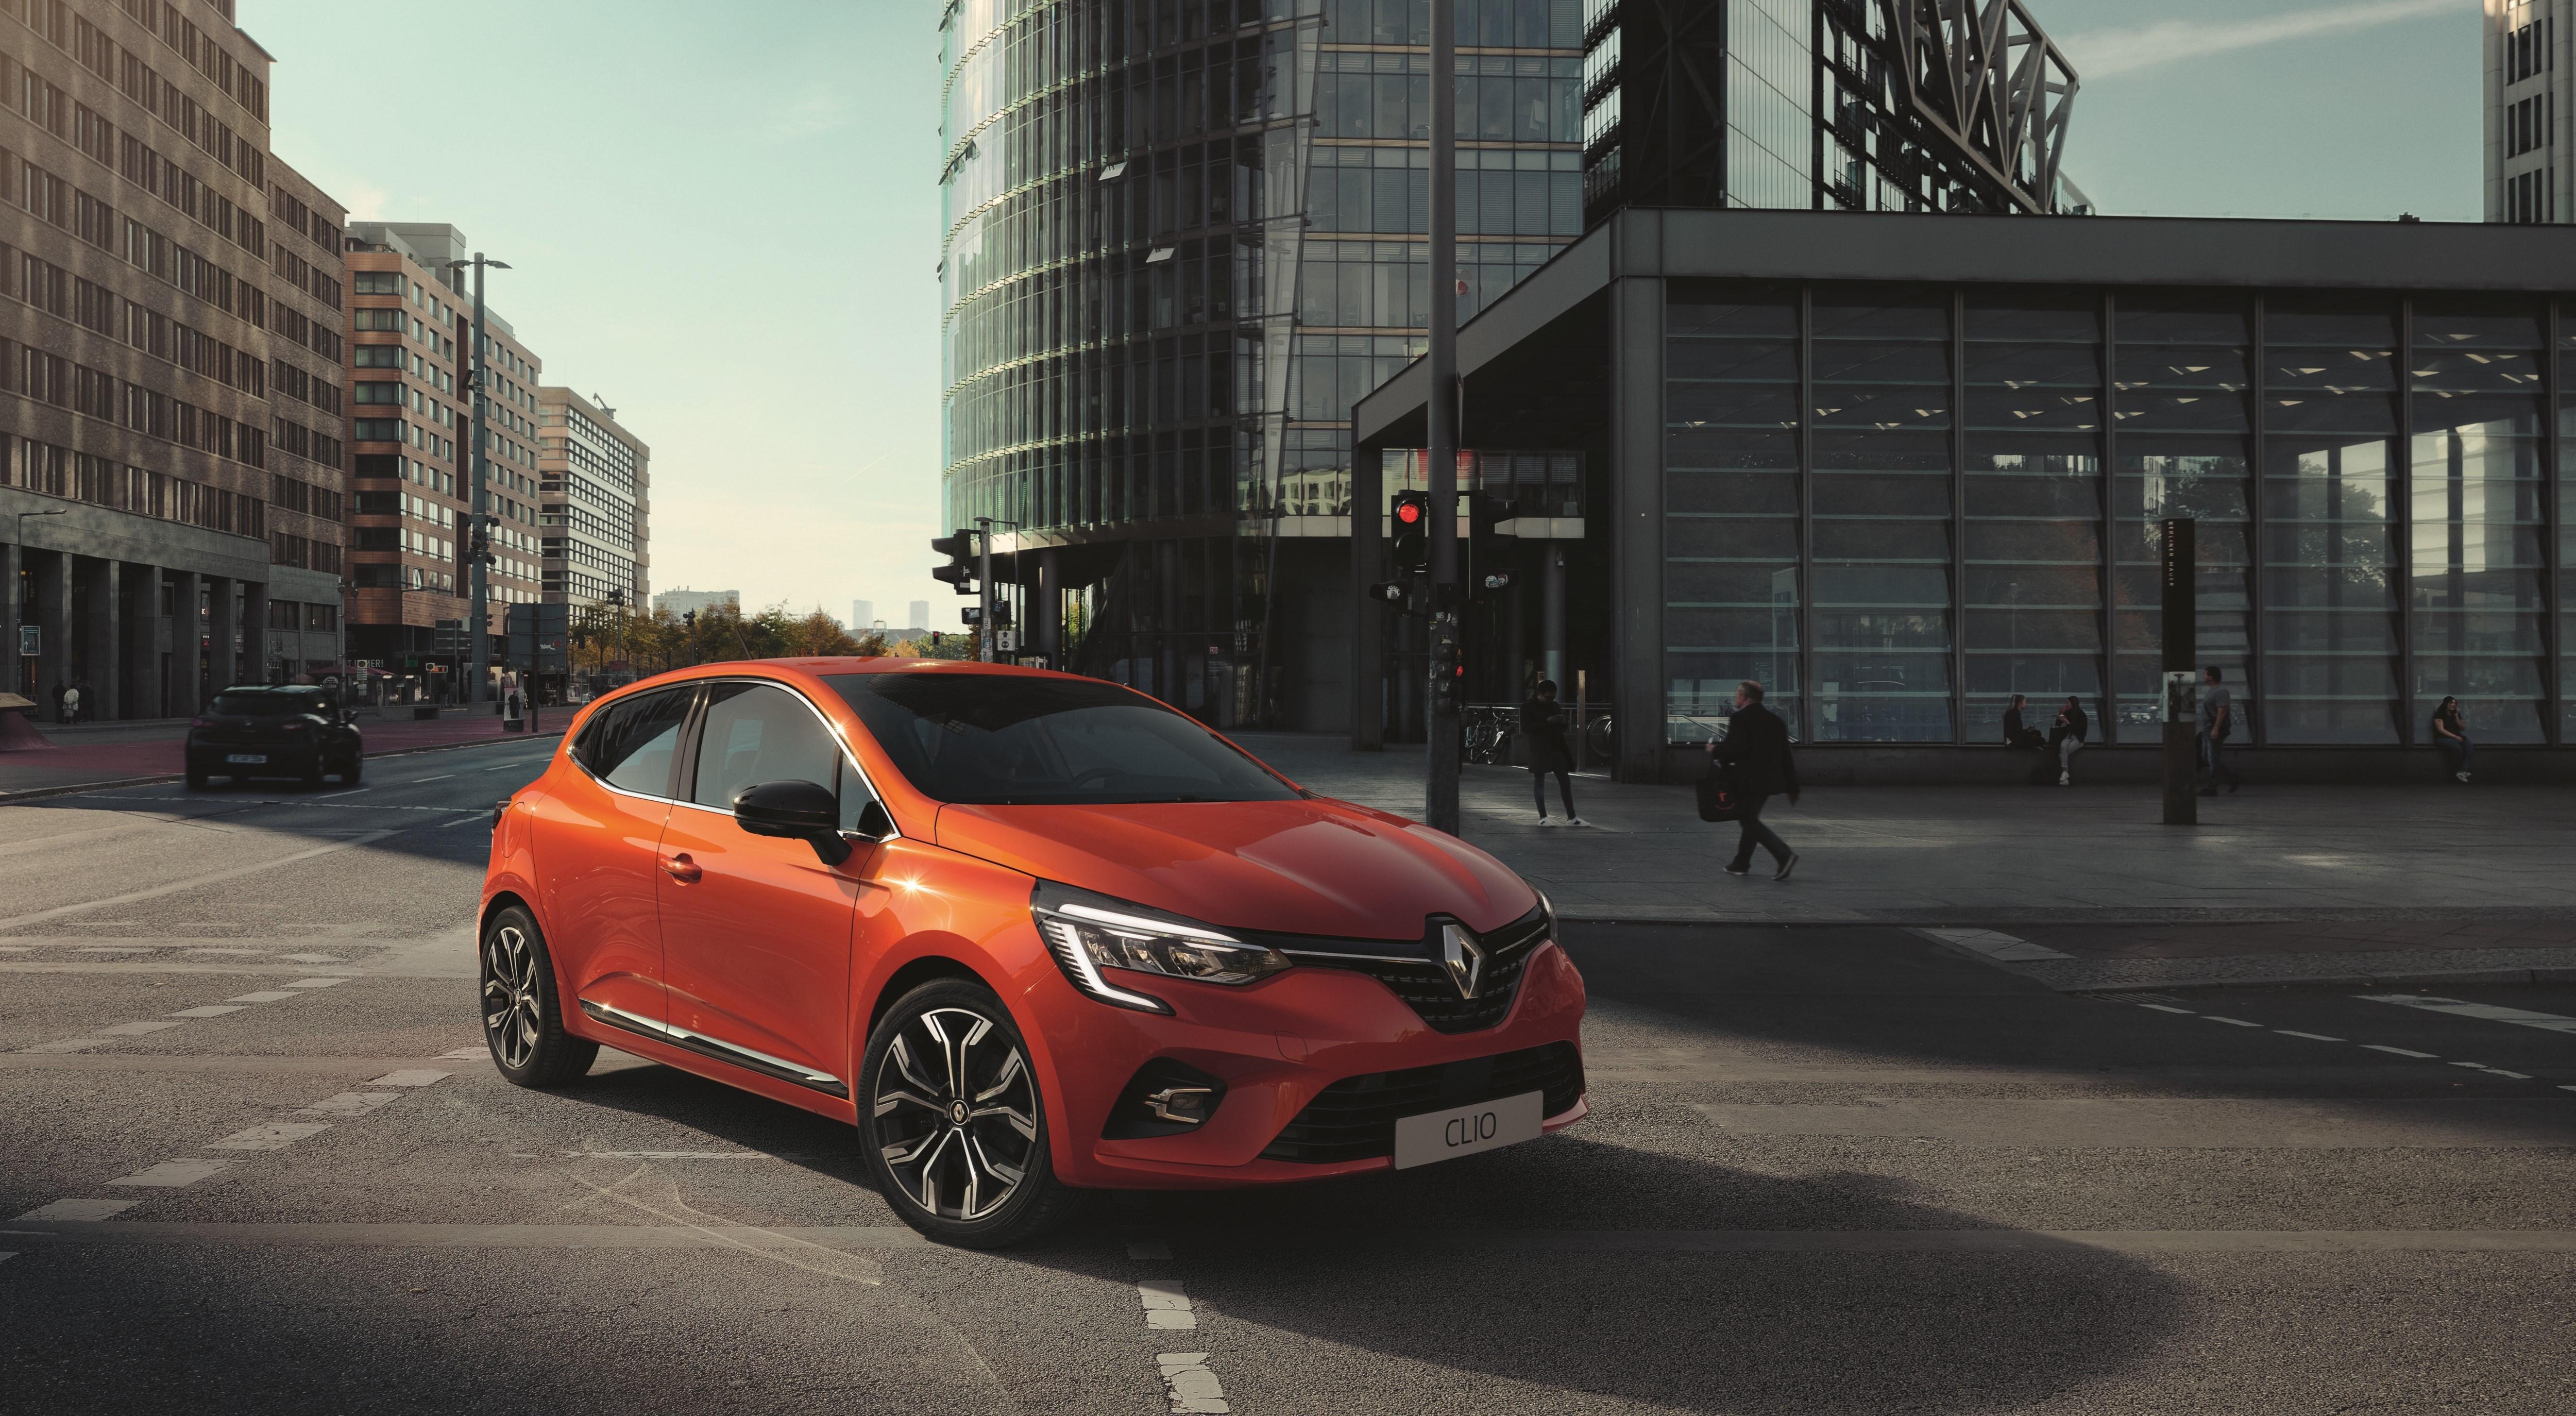 Wallpaper Of The Day: 2019 Renault Clio Picture, Photo, Wallpaper